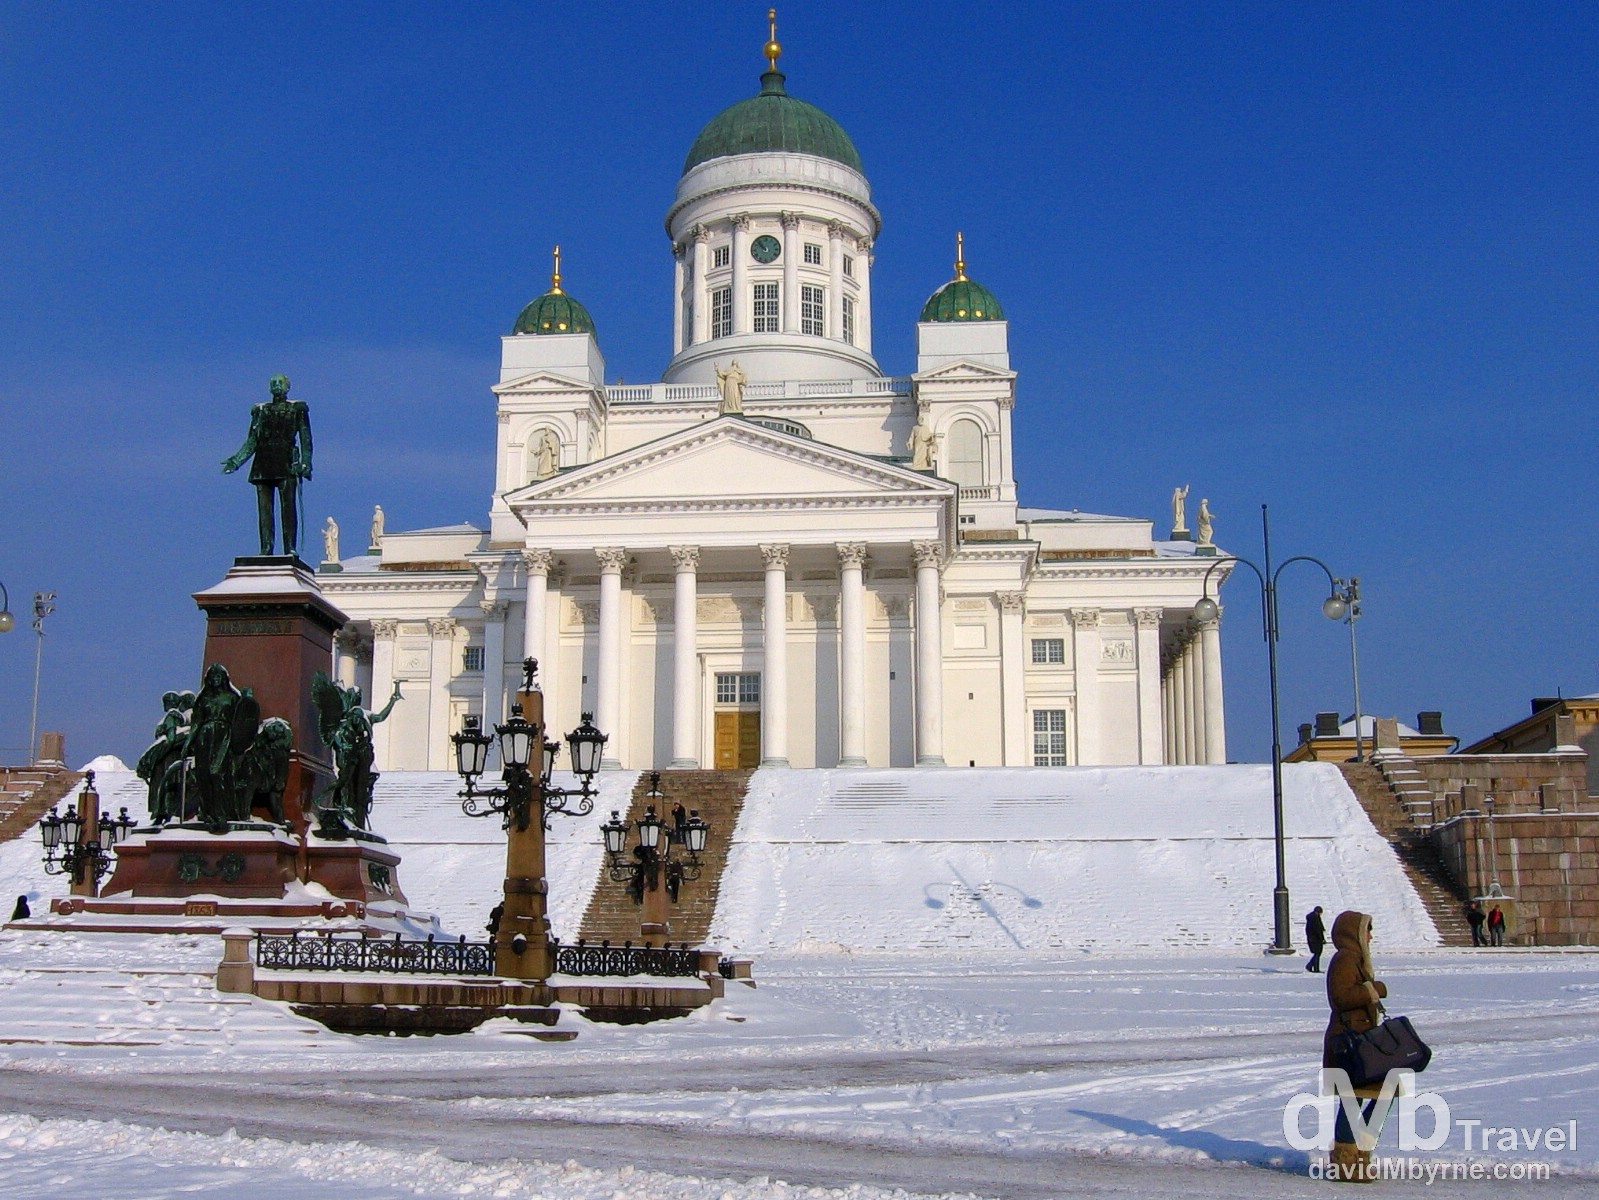 Helsinki Cathedral overlooking Senate Square in Helsinki, Finland. March 1, 2006.